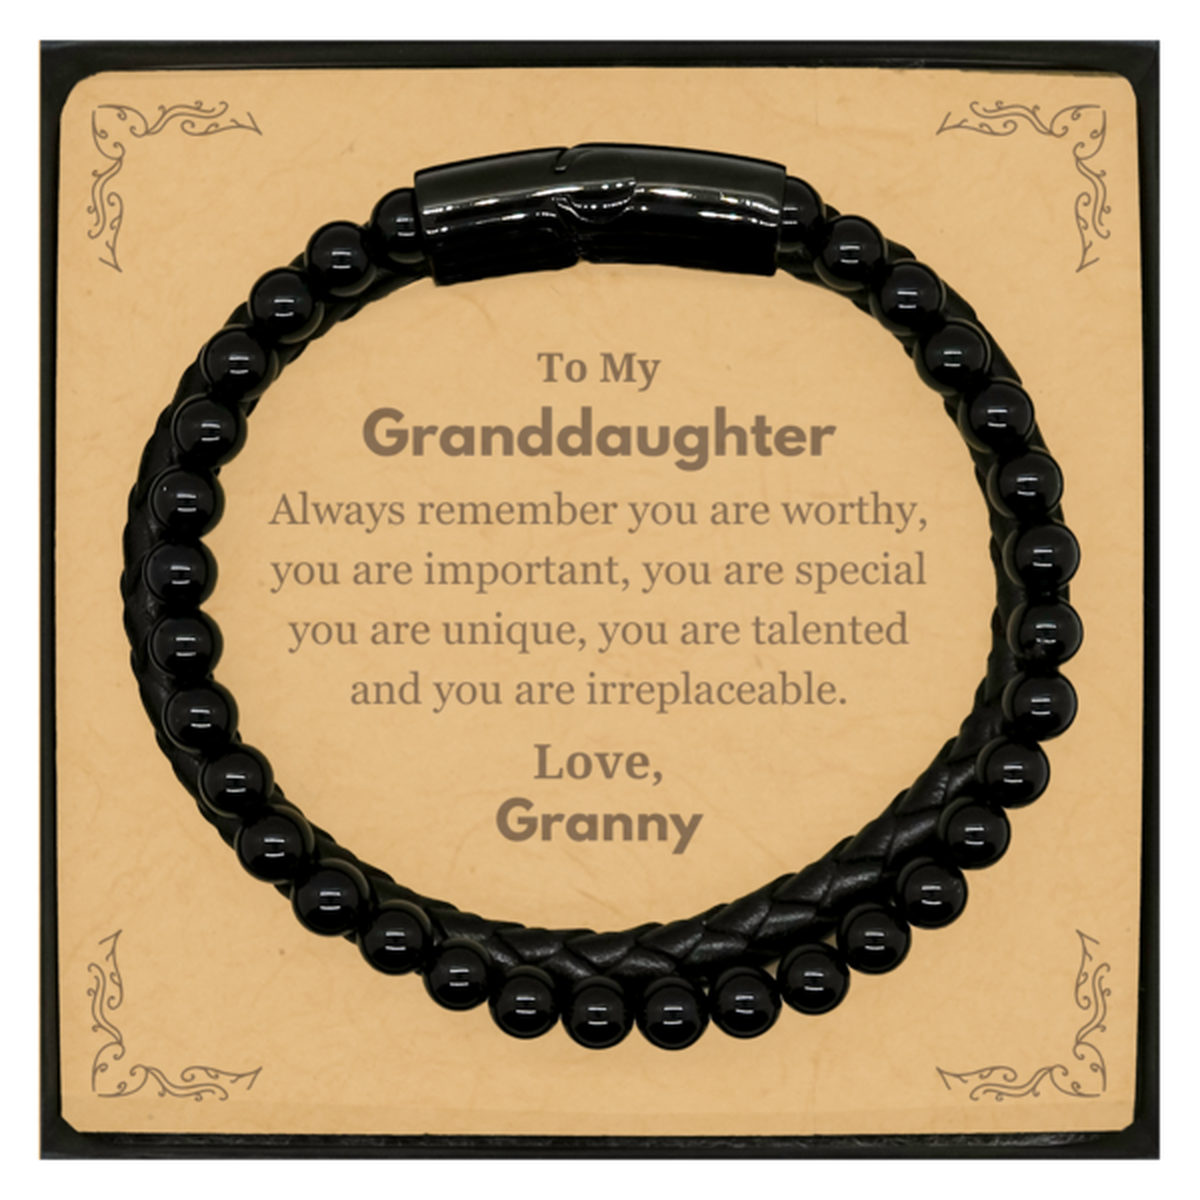 Granddaughter Birthday Gifts from Granny, Inspirational Stone Leather Bracelets for Granddaughter Christmas Graduation Gifts for Granddaughter Always remember you are worthy, you are important. Love, Granny